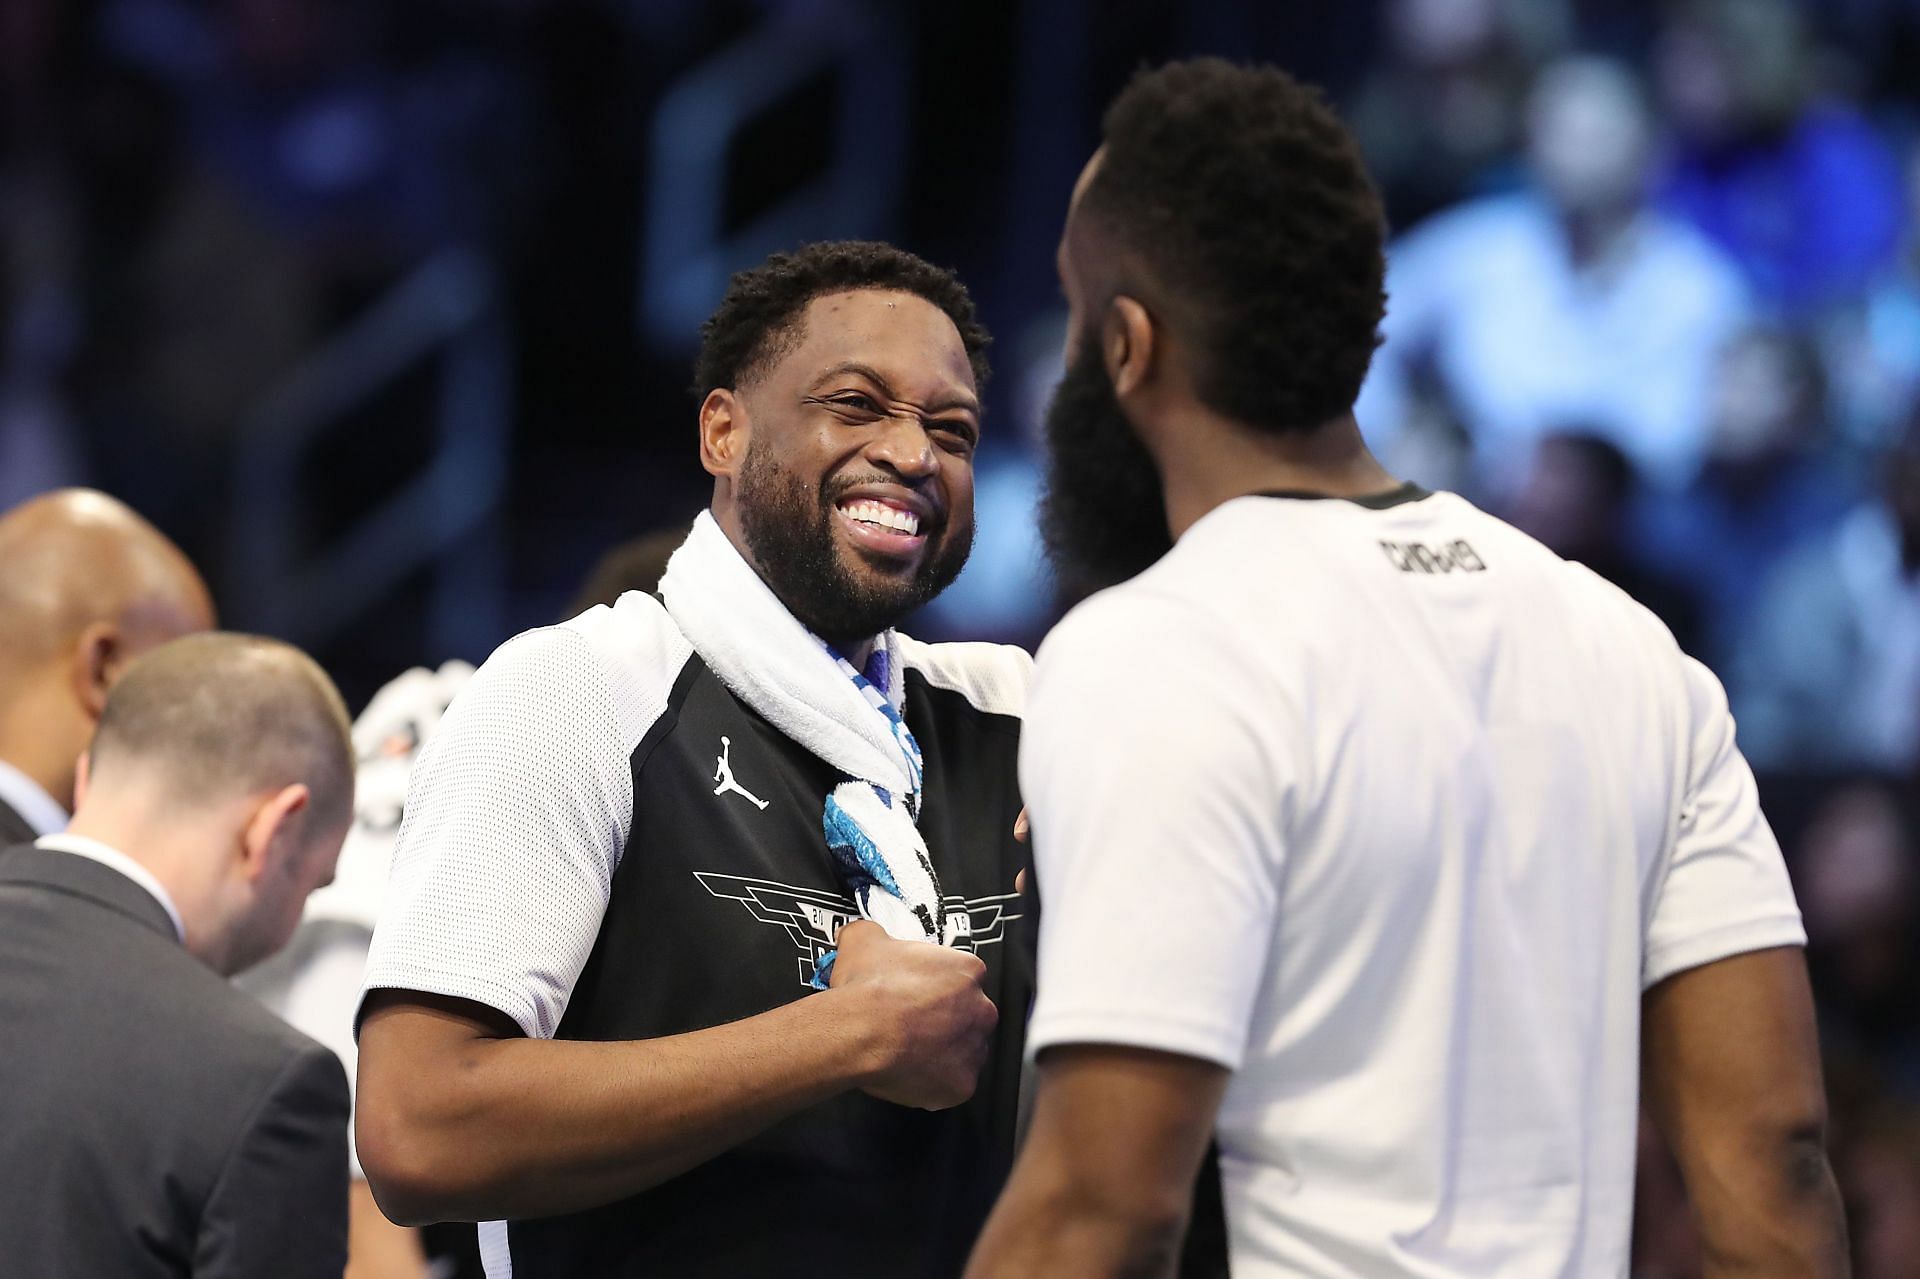 Dwyane Waade, left, and James Harden chat at the 2019 NBA All-Star Game in Charlotte, N.C.